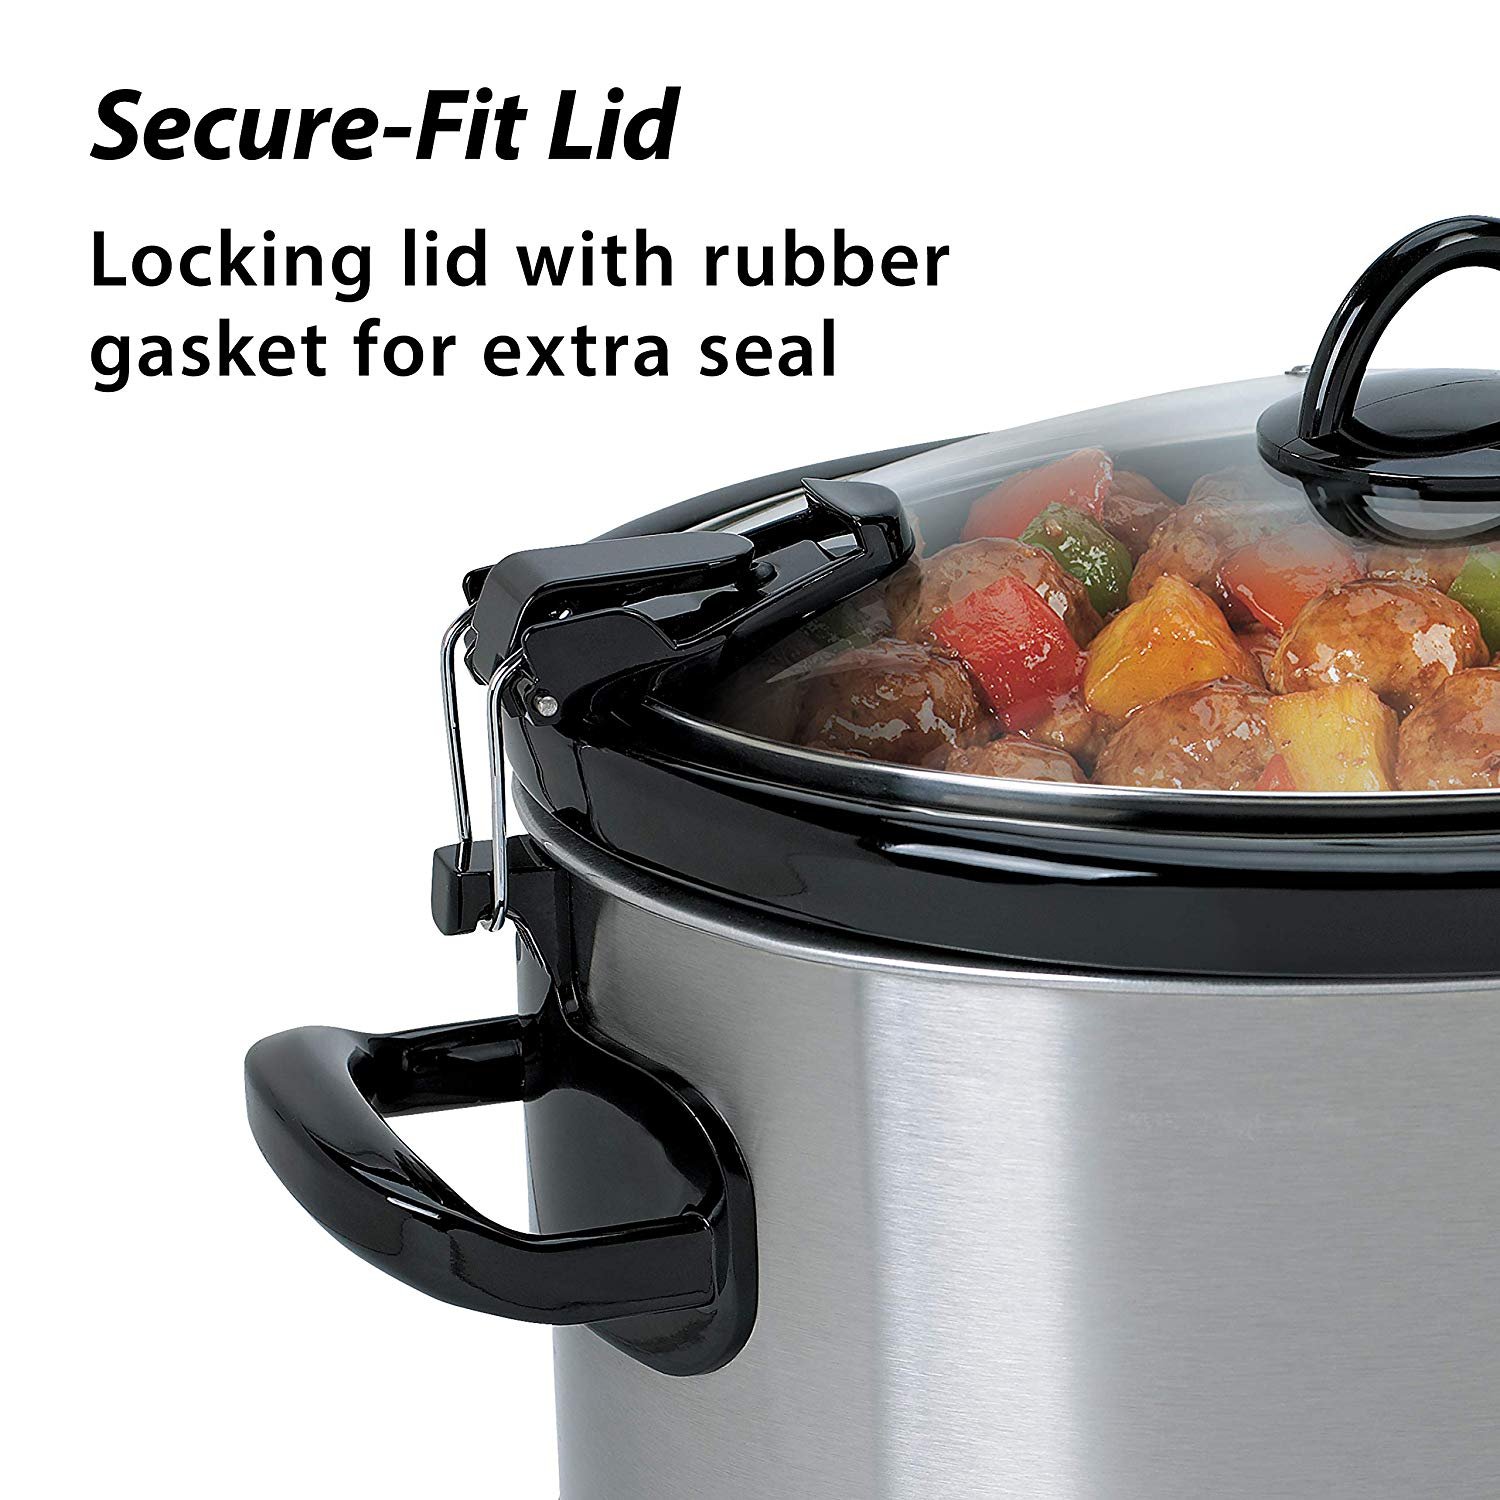 Crock-Pot Cook & Carry 6-Quart Oval Portable Manual Slow Cooker  Stainless Steel SCCPVL600S - image 3 of 5